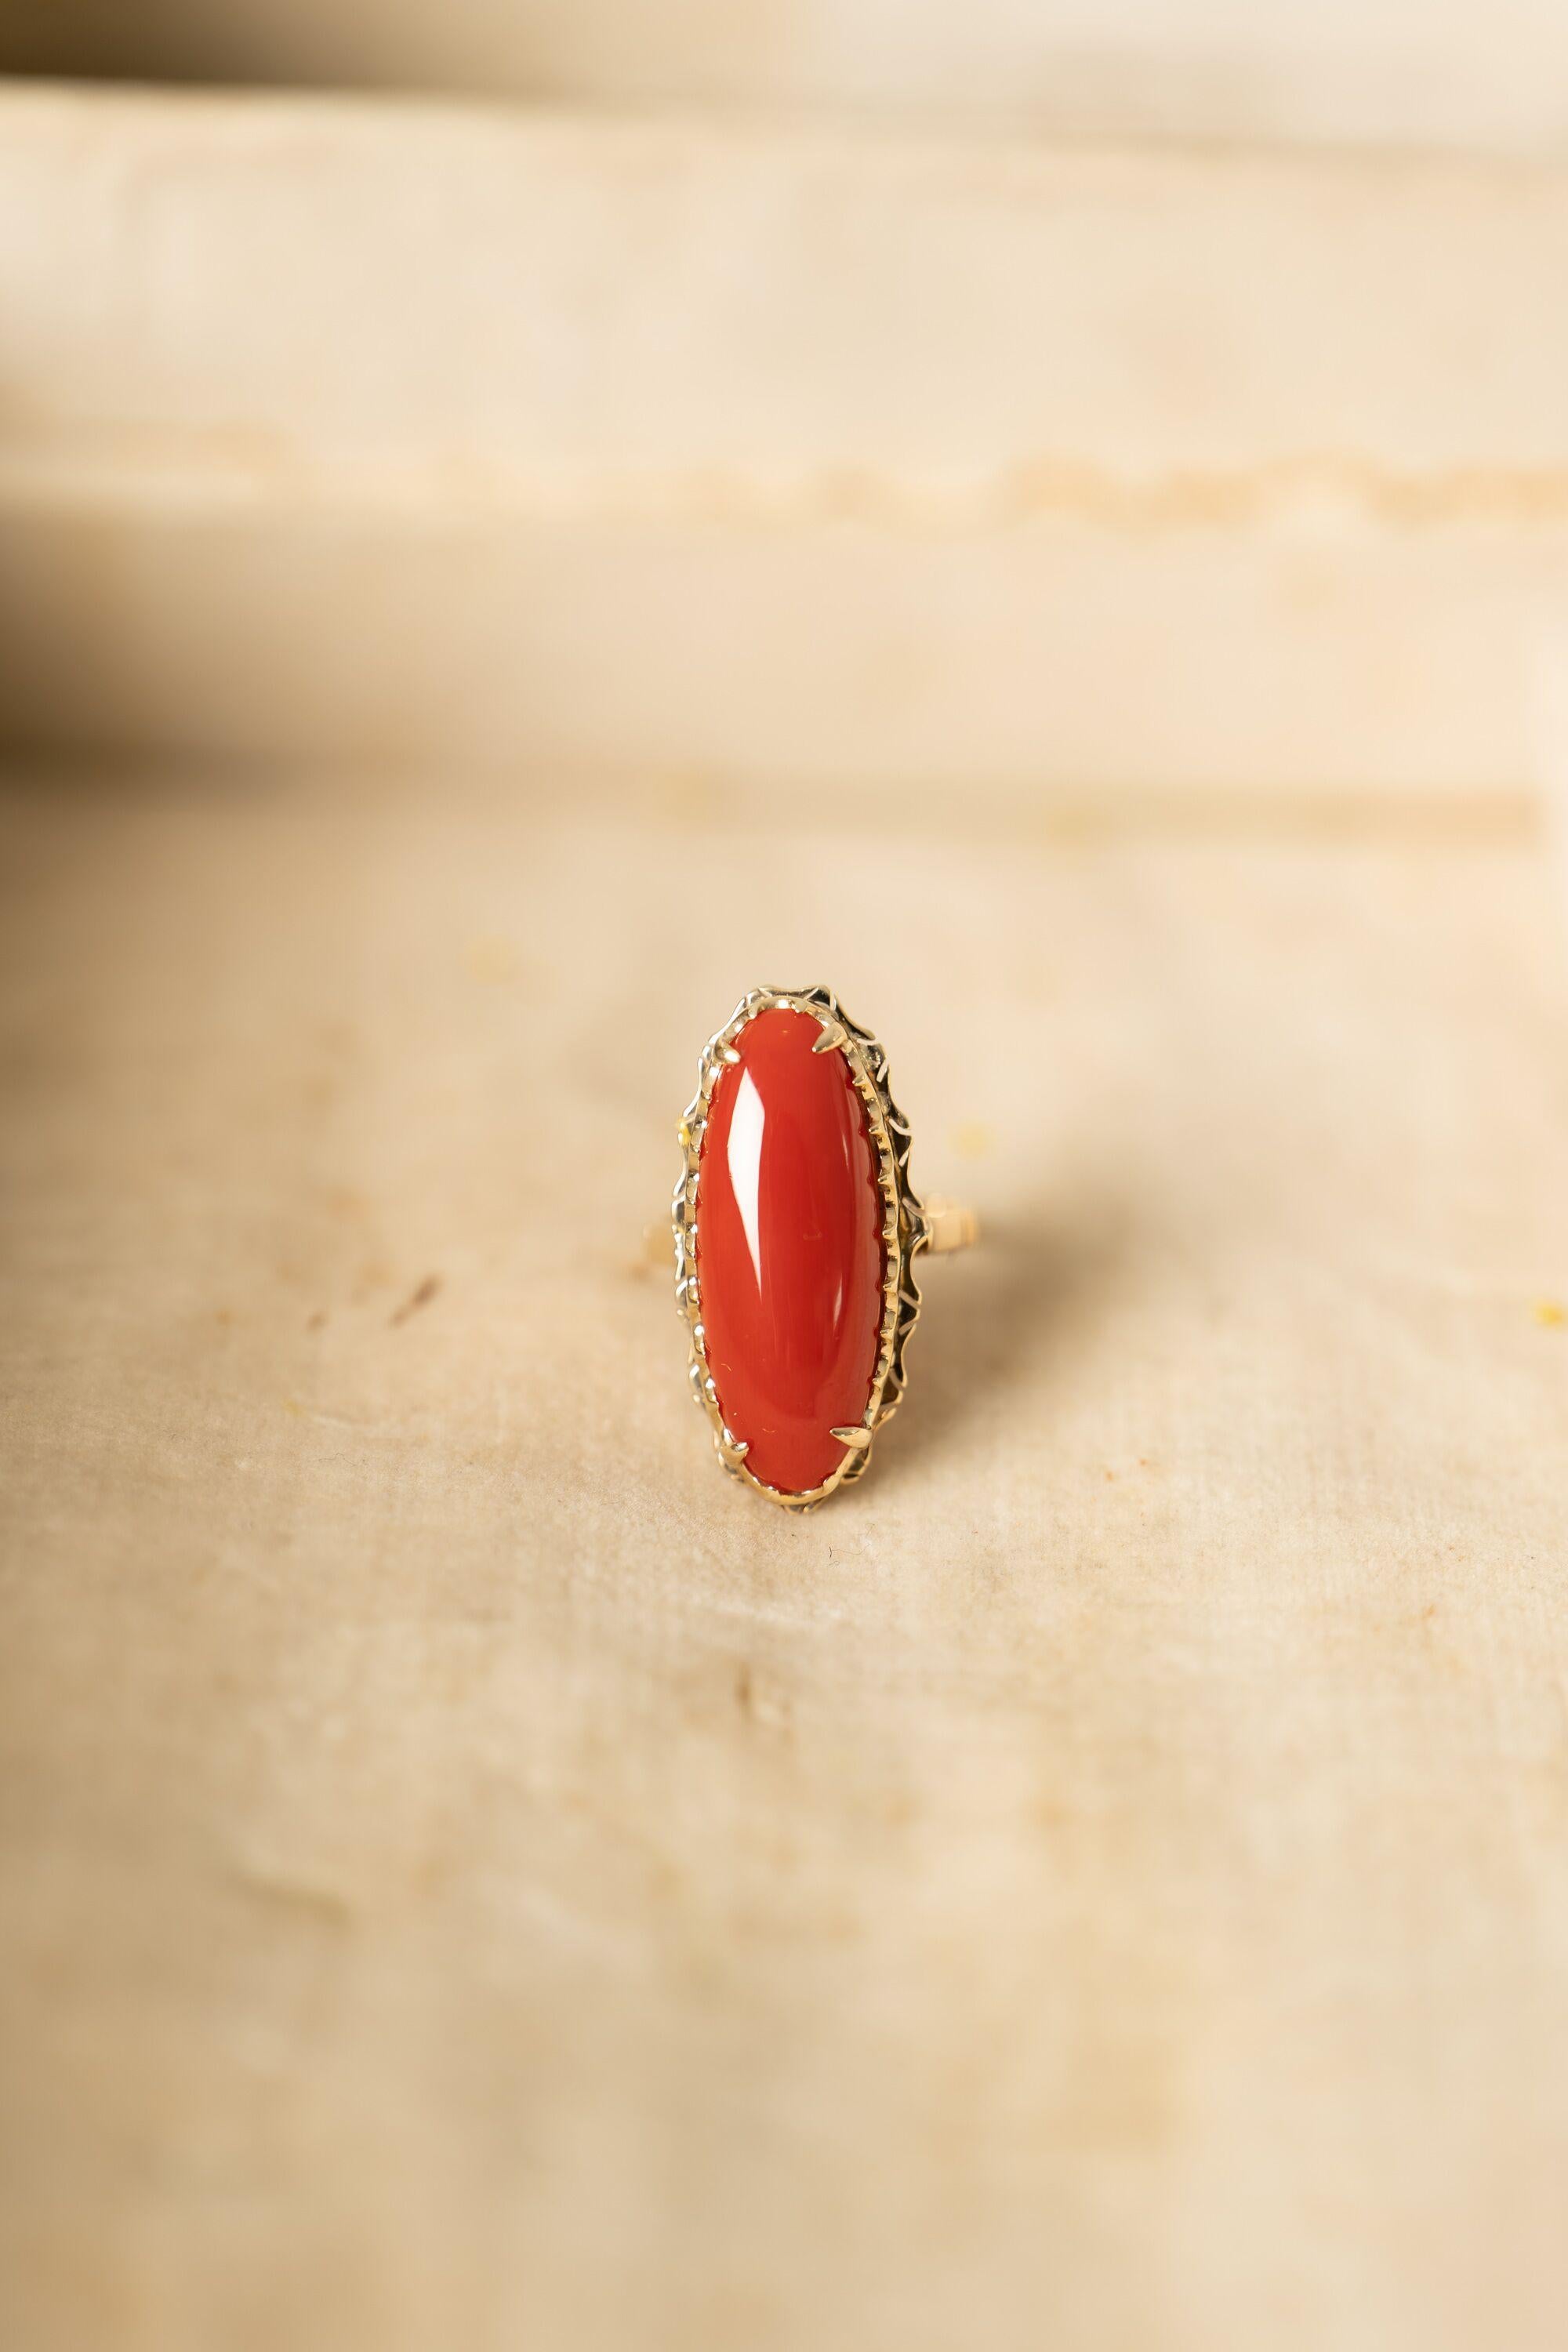 Antique Victorian, French, Natural 'Ox Blood' Coral Cocktail Ring, Original Box In Excellent Condition For Sale In Rochford, Essex